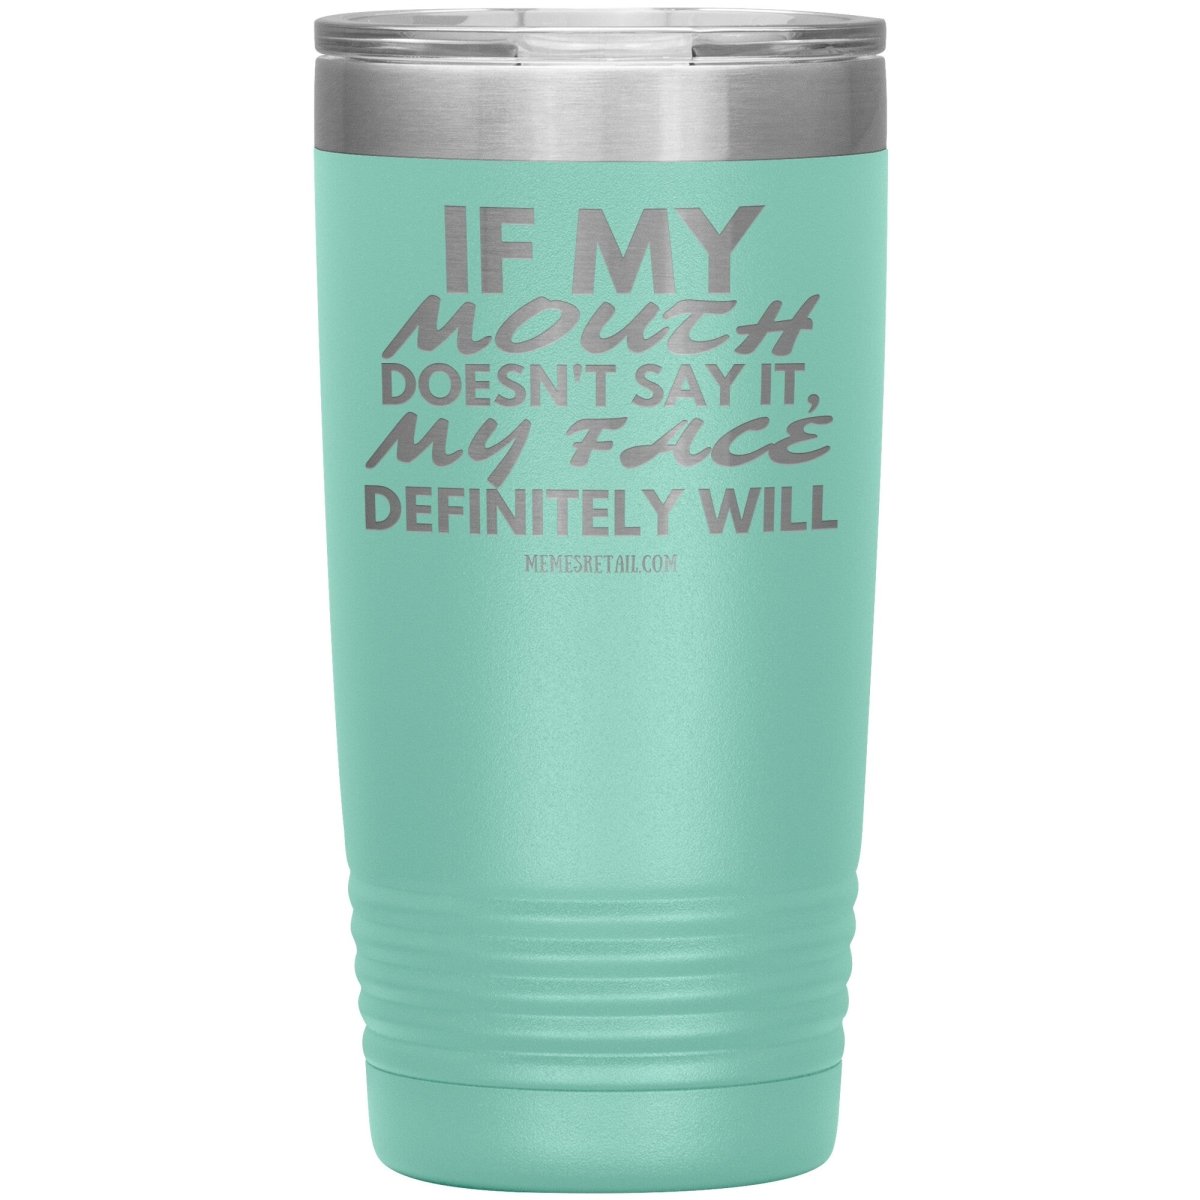 If my mouth doesn't say it, my face definitely will Tumblers, 20oz Insulated Tumbler / Teal - MemesRetail.com